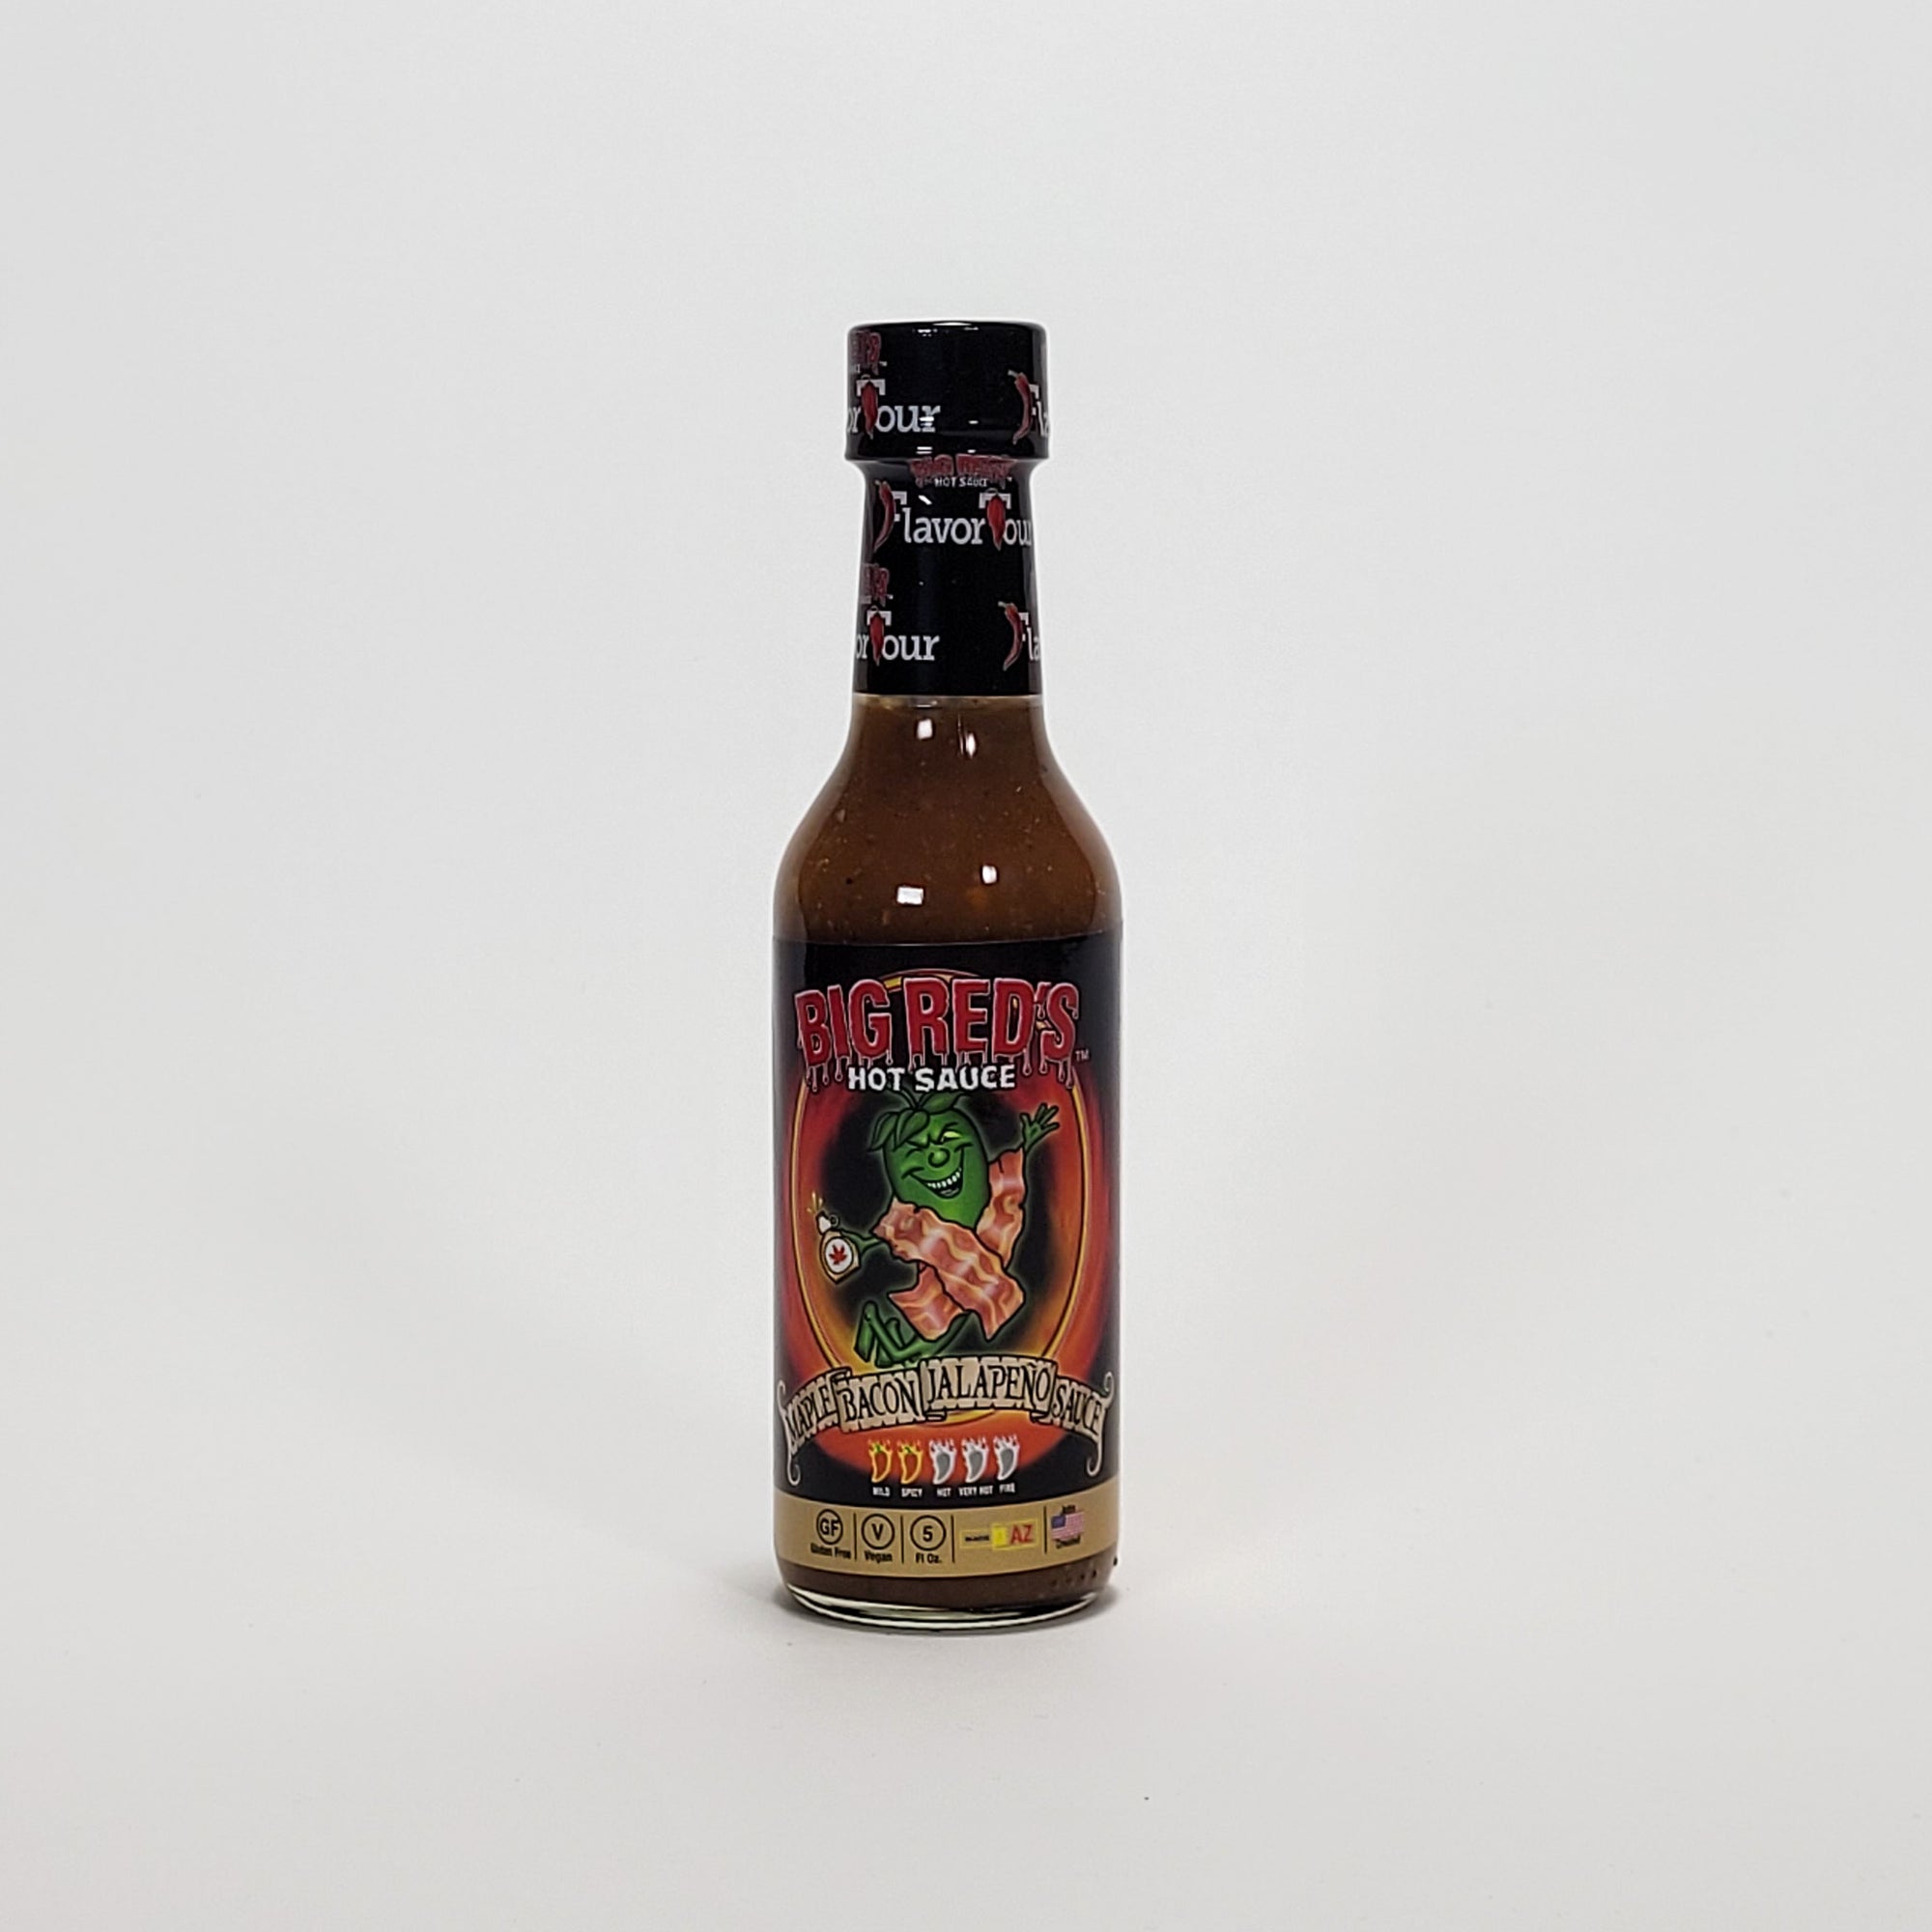 Big Red's Maple Bacon Jalapeno hot sauce